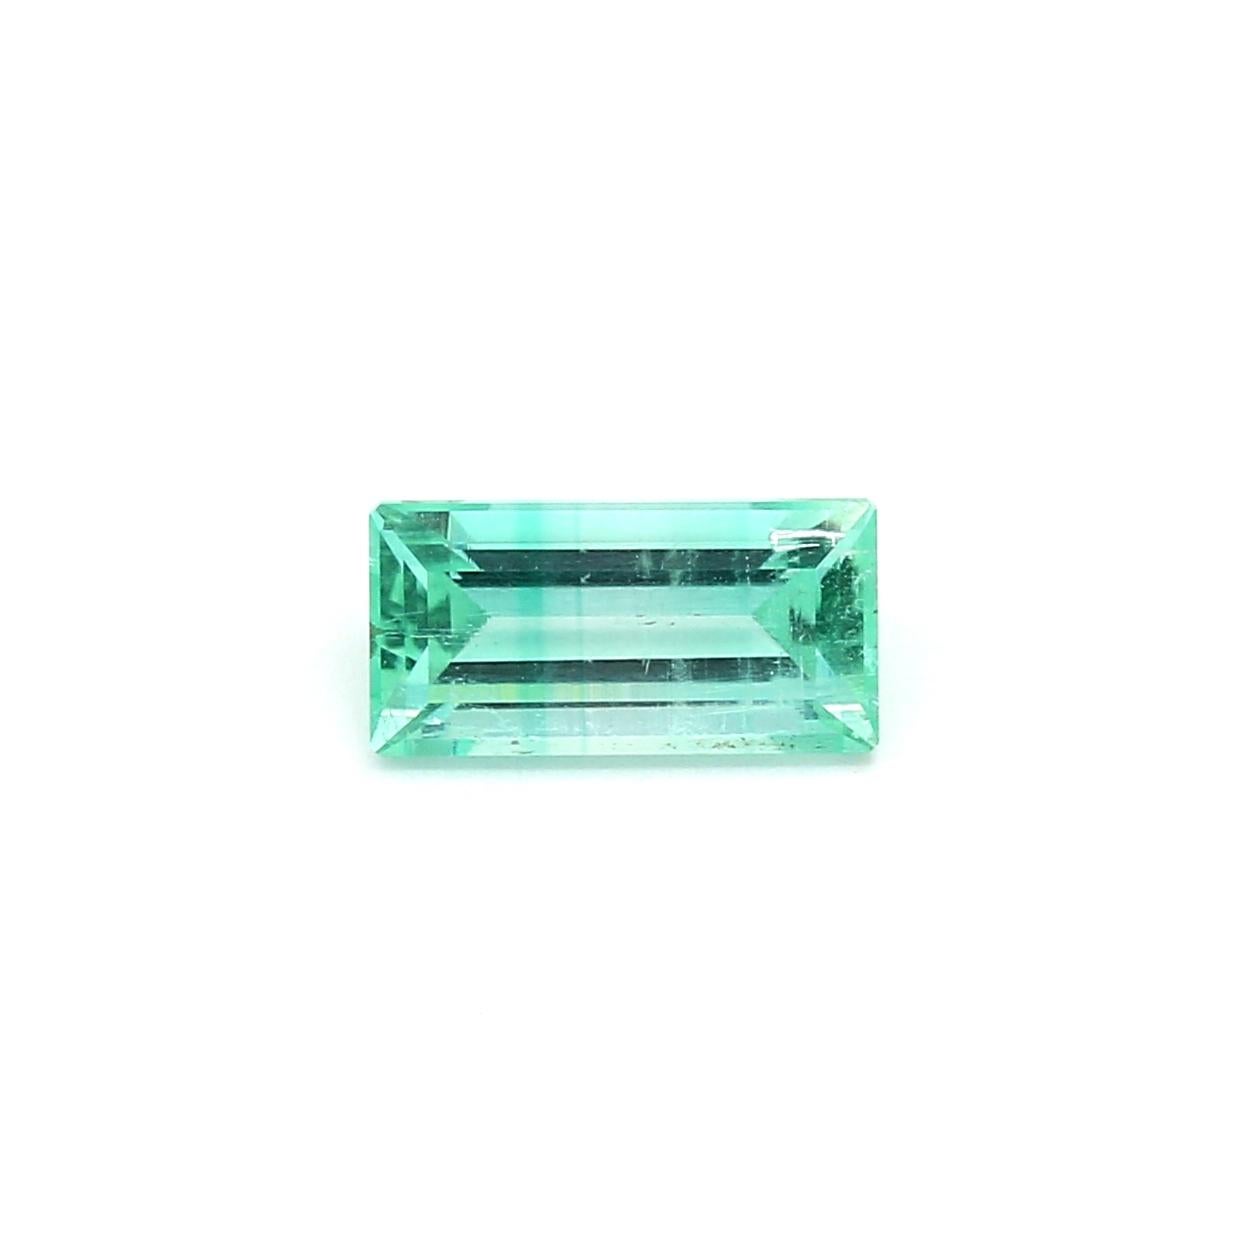 An amazing Russian Emerald which allows jewelers to create a unique piece of wearable art.
This exceptional quality gemstone would make a custom-made jewelry design. Perfect for a Ring or Pendant.

Shape - Baguette
Weight - 1.11 ct
Treatment -